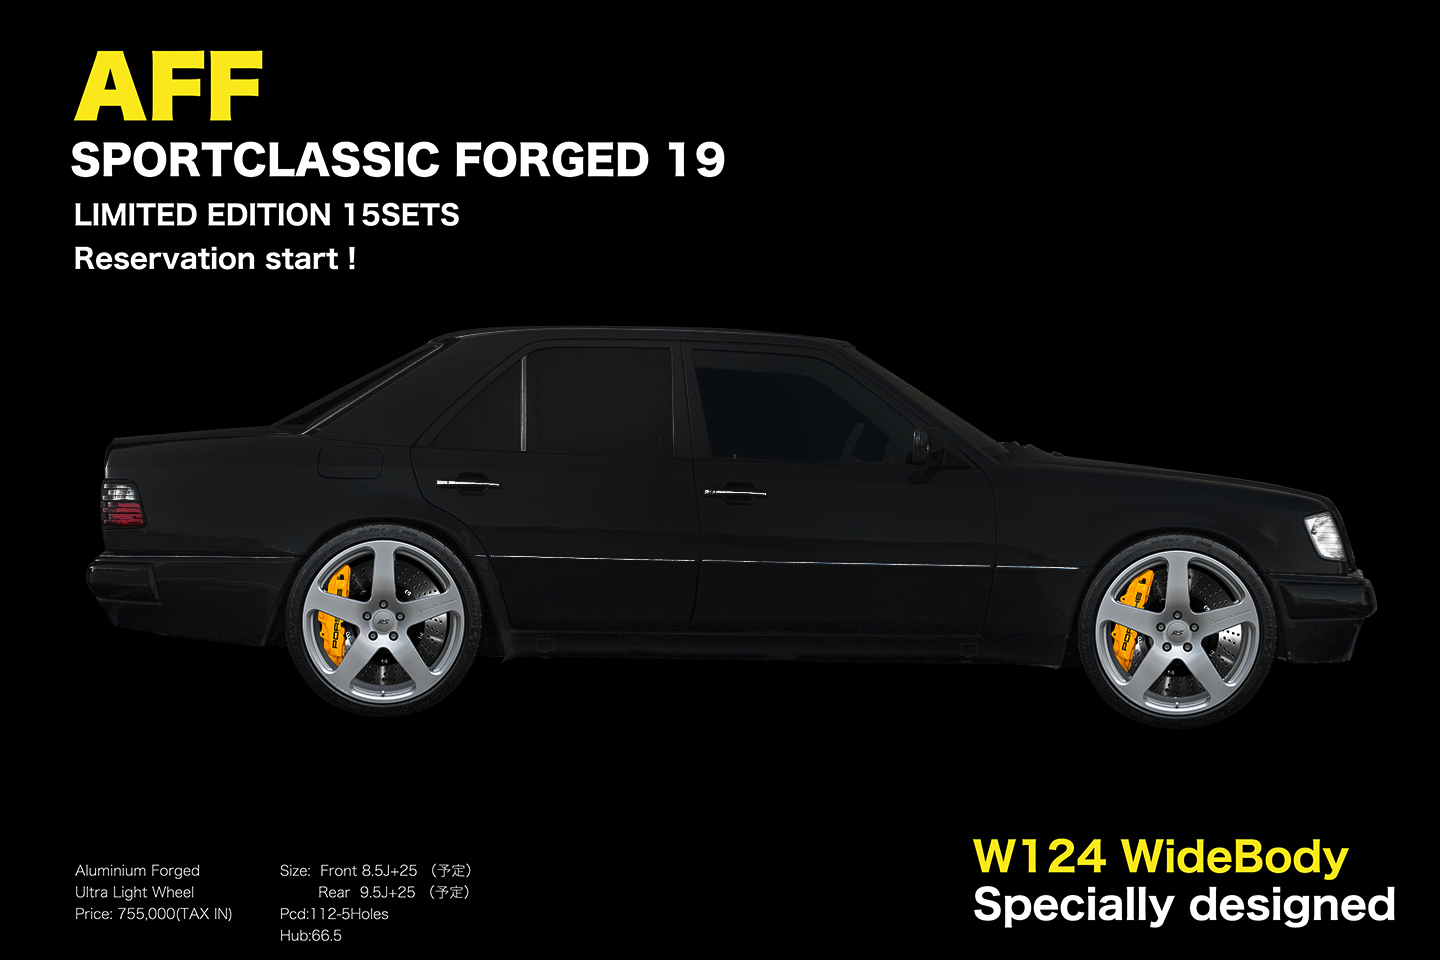 W124 FOR4GED89